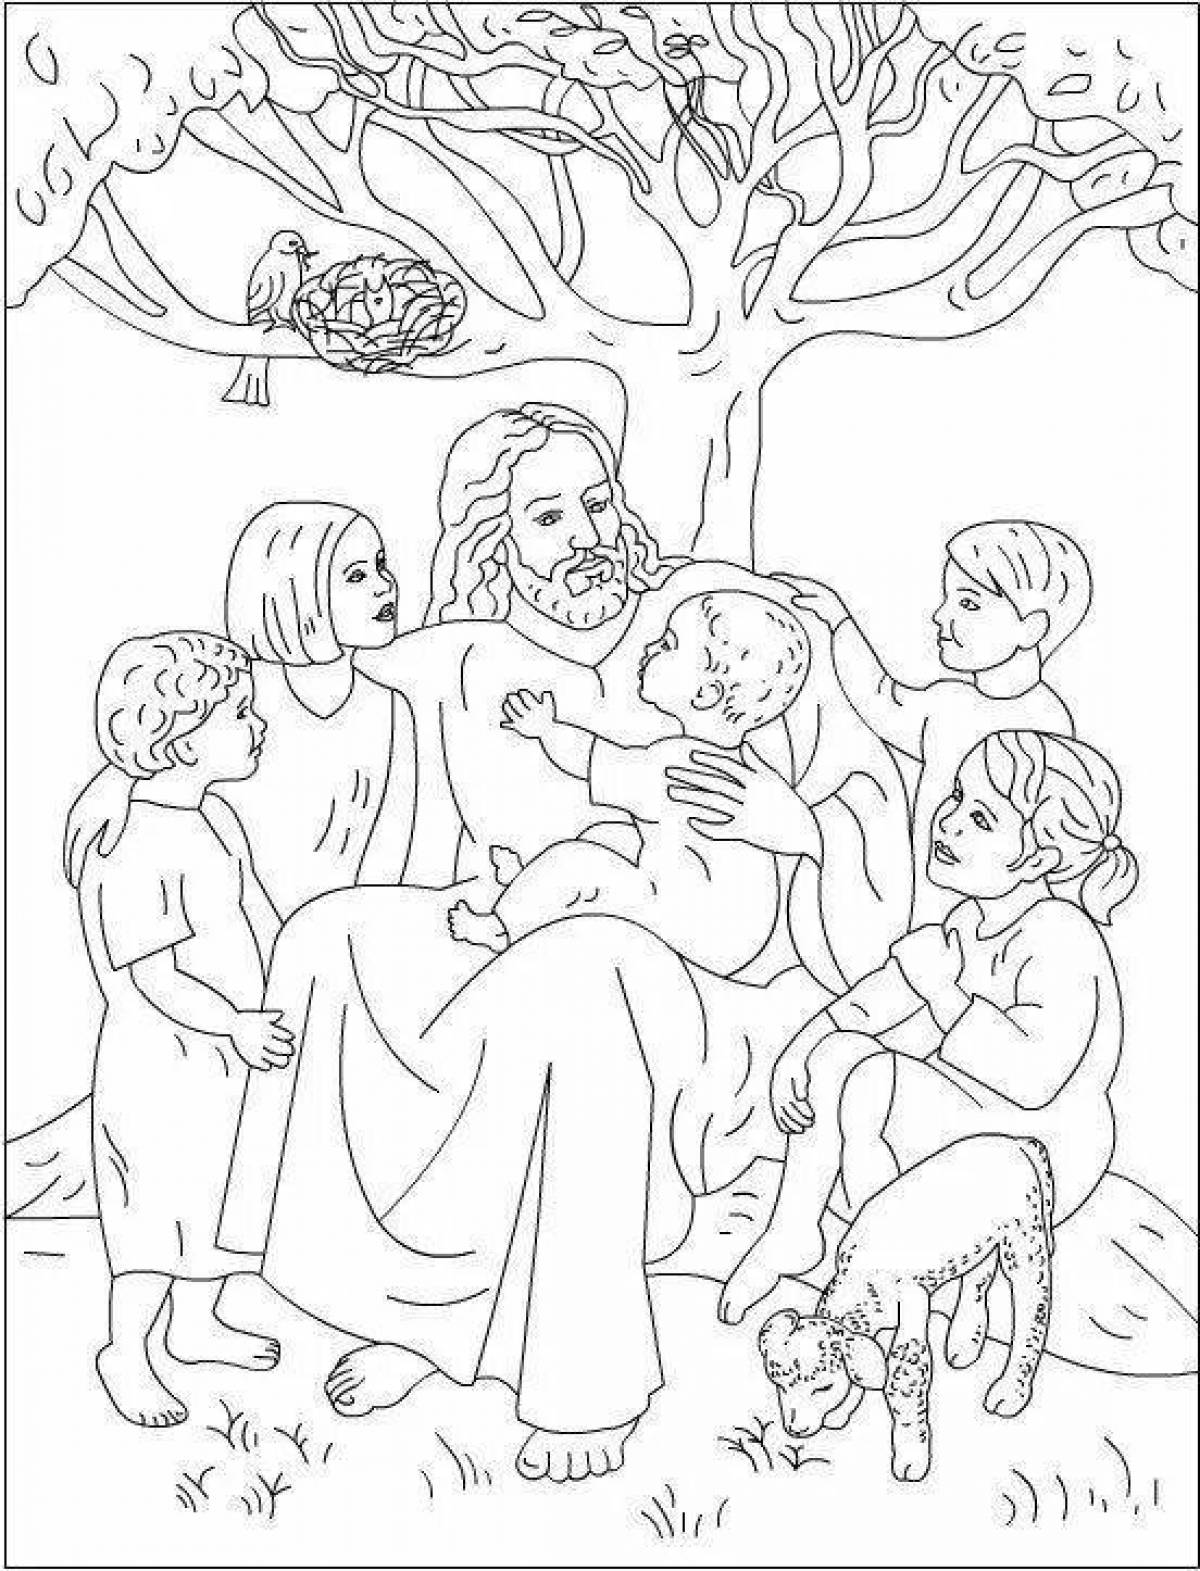 Christian angelic baby coloring page